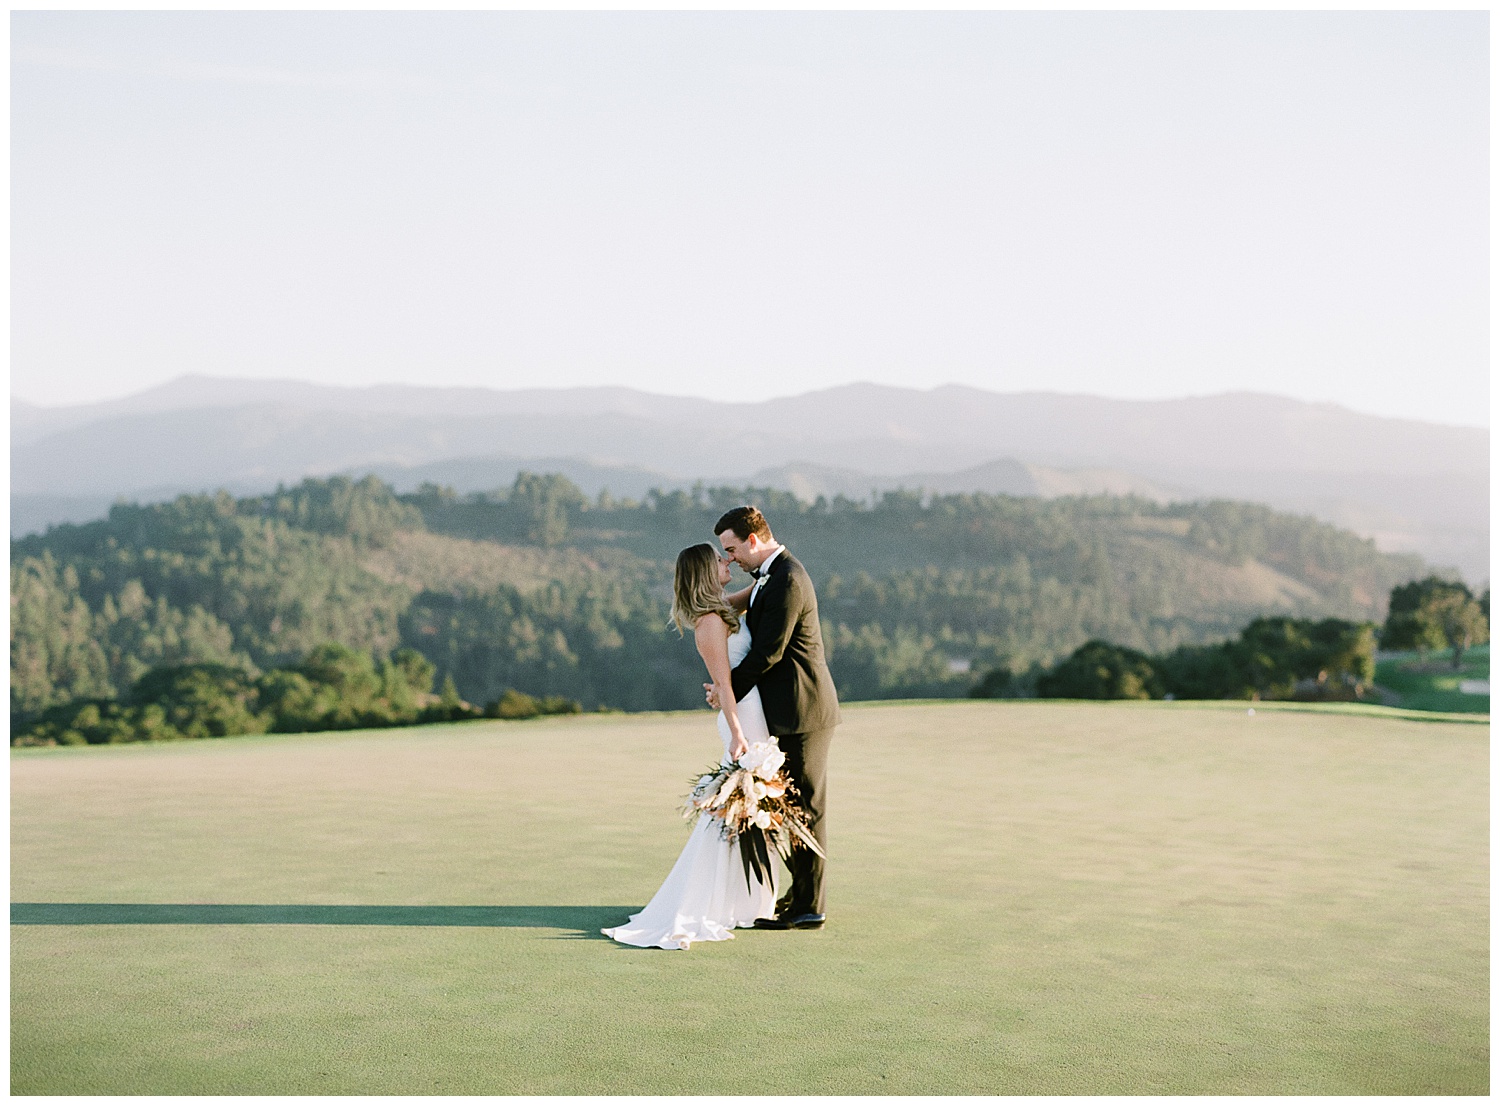 couple embracing in the middle of a large open golf field